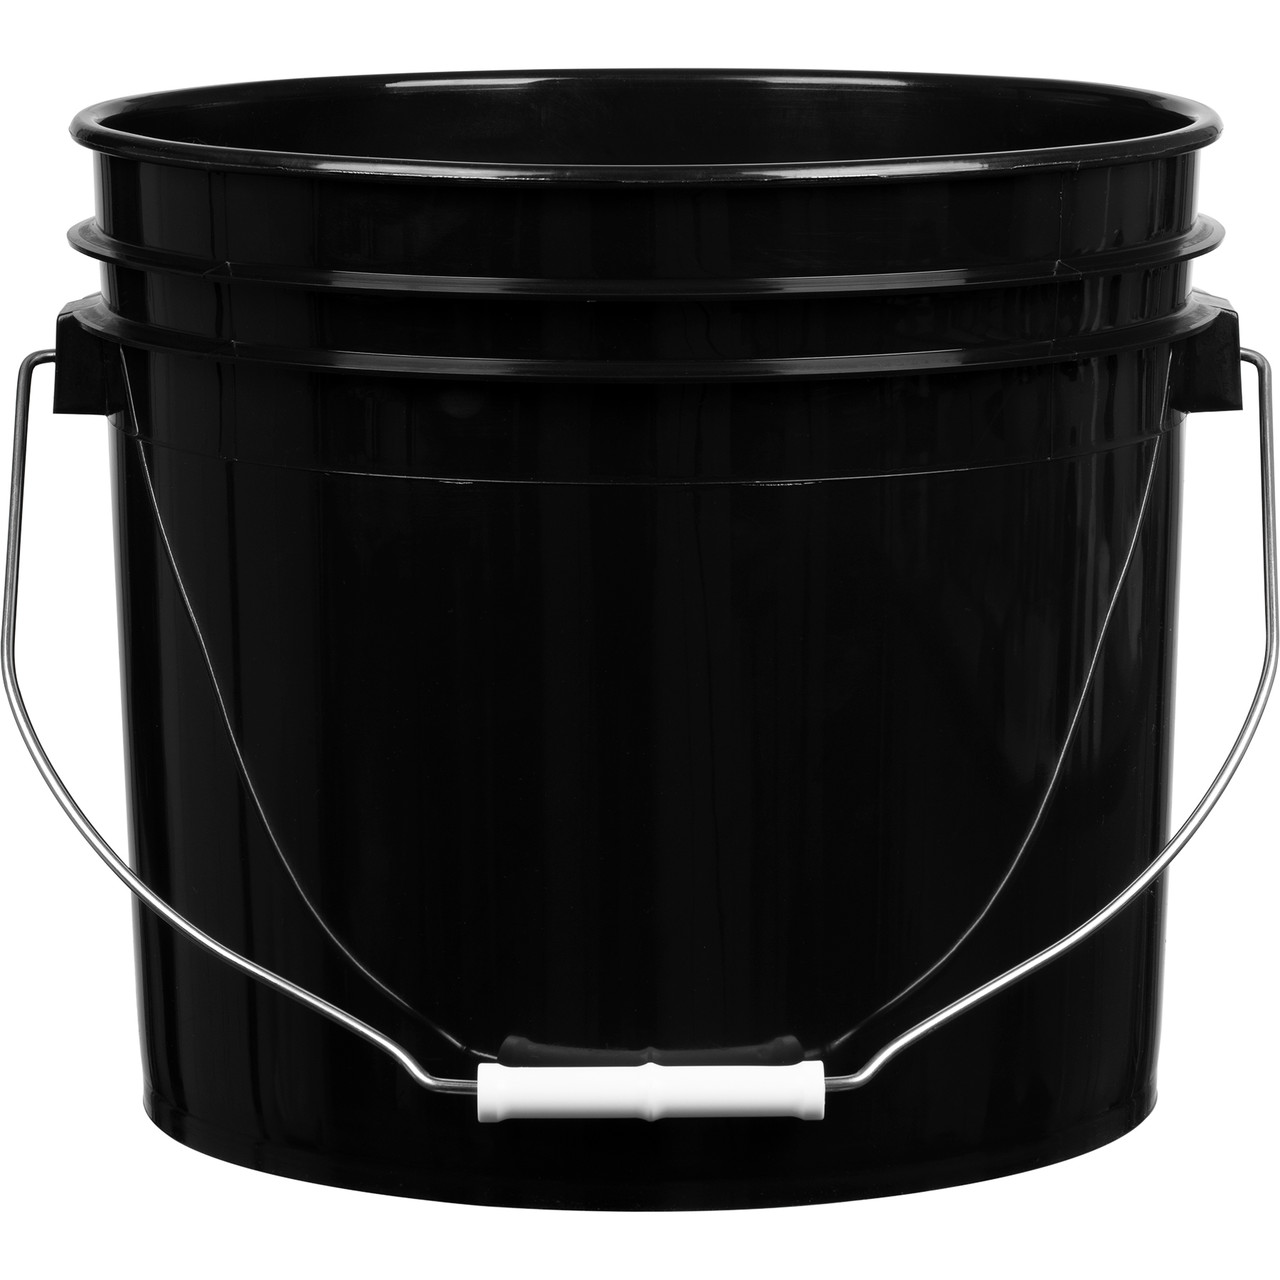 Single 3.5 Gallon Bucket without Lid